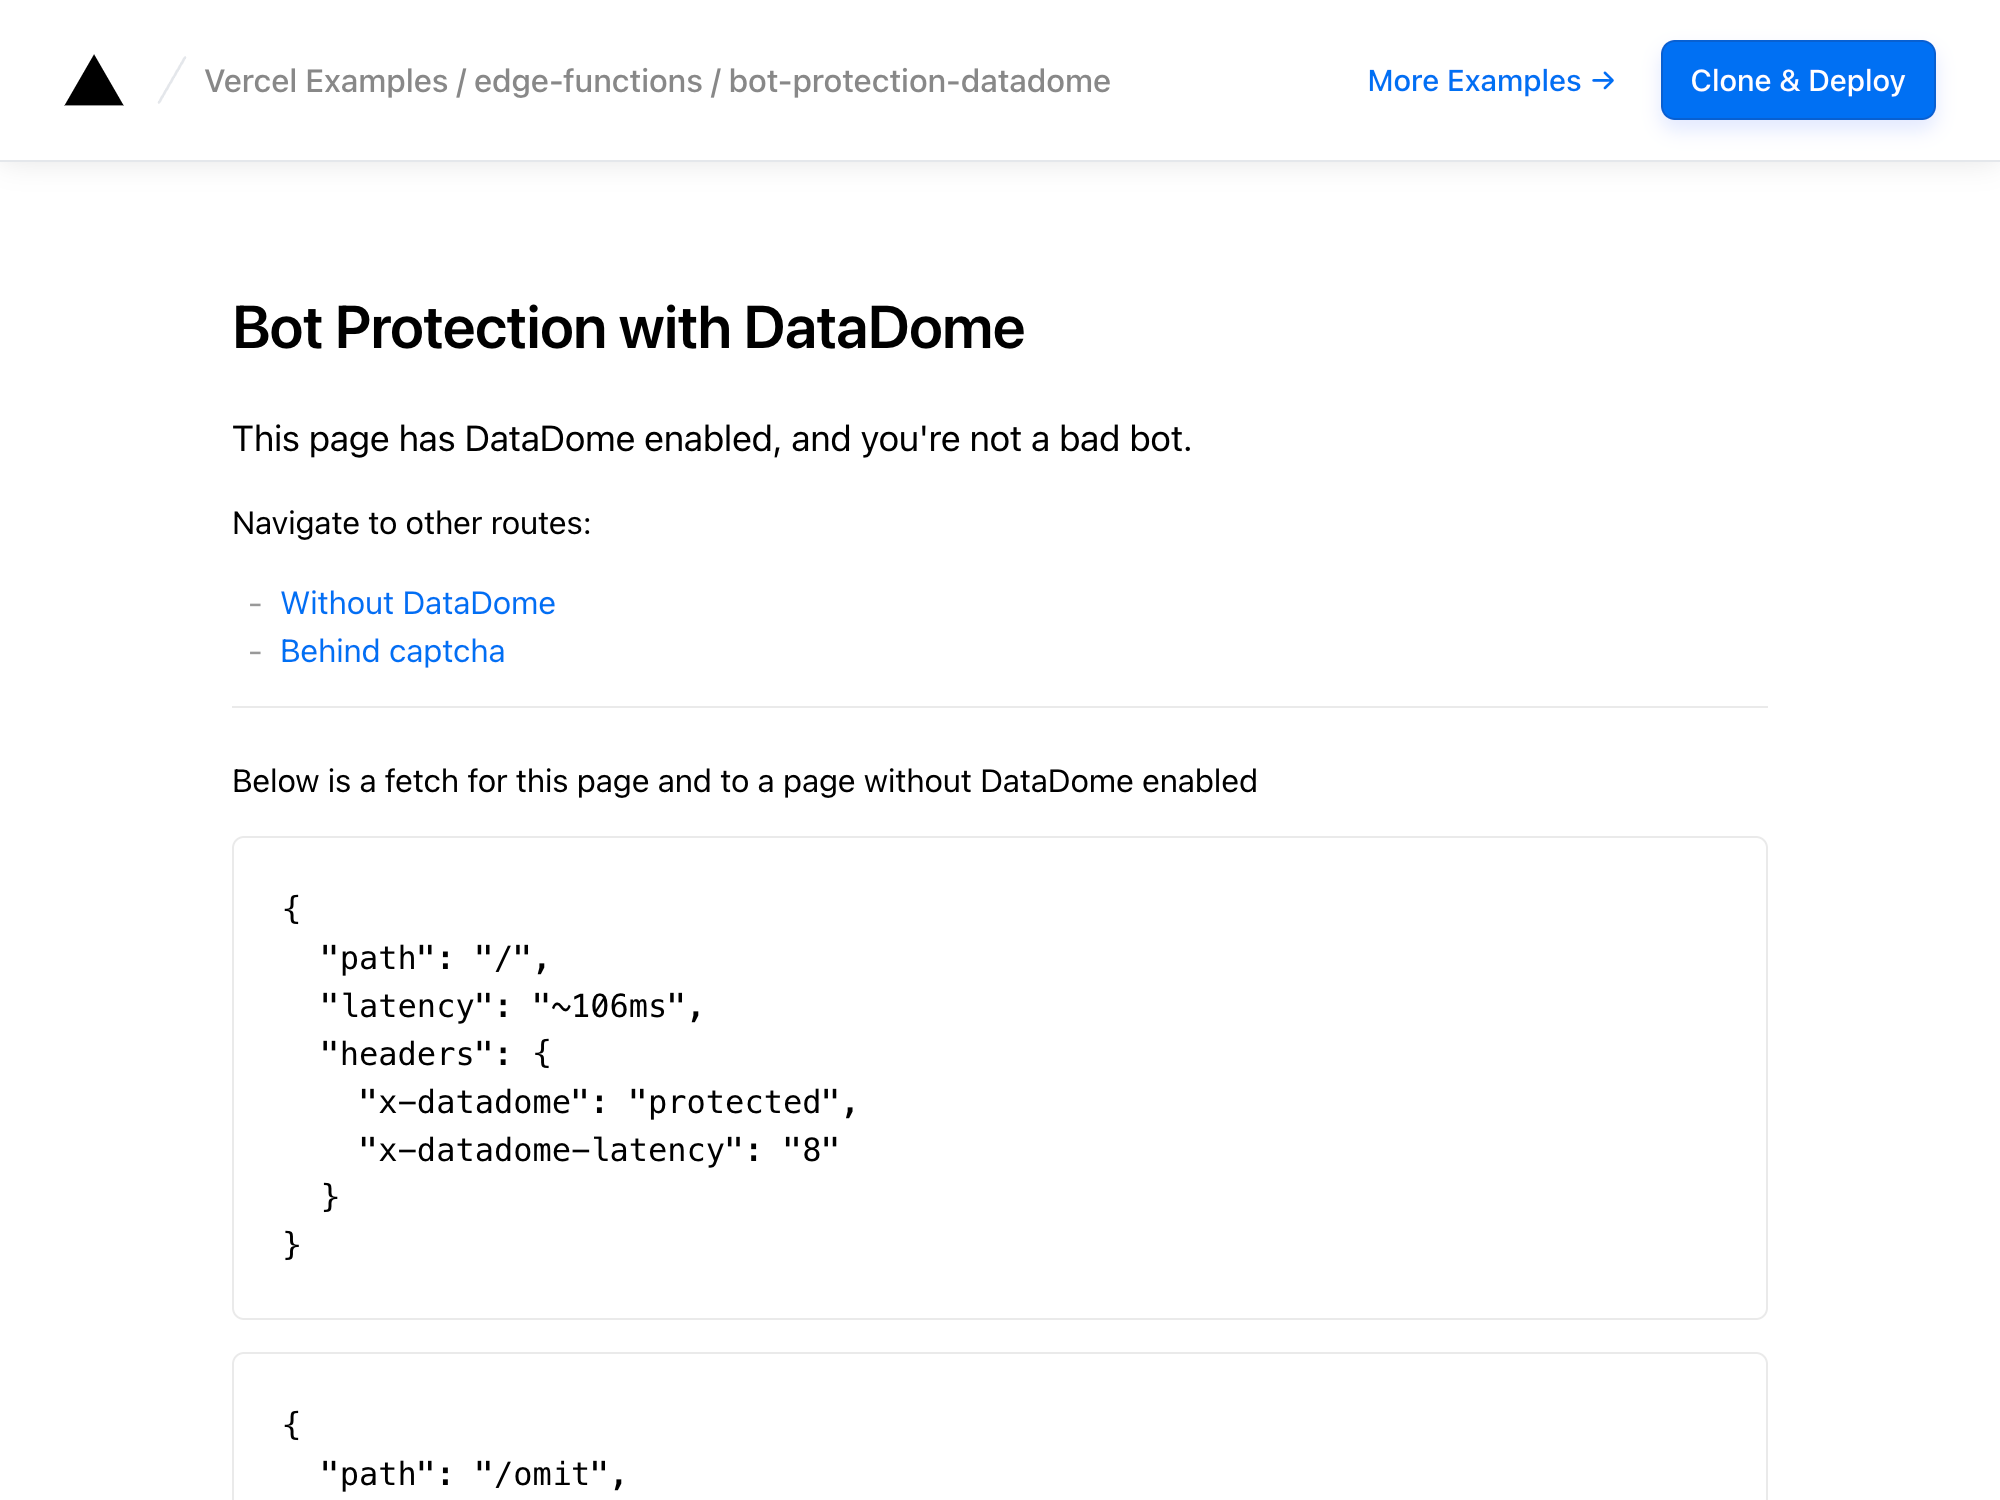 Bot Protection with DataDome